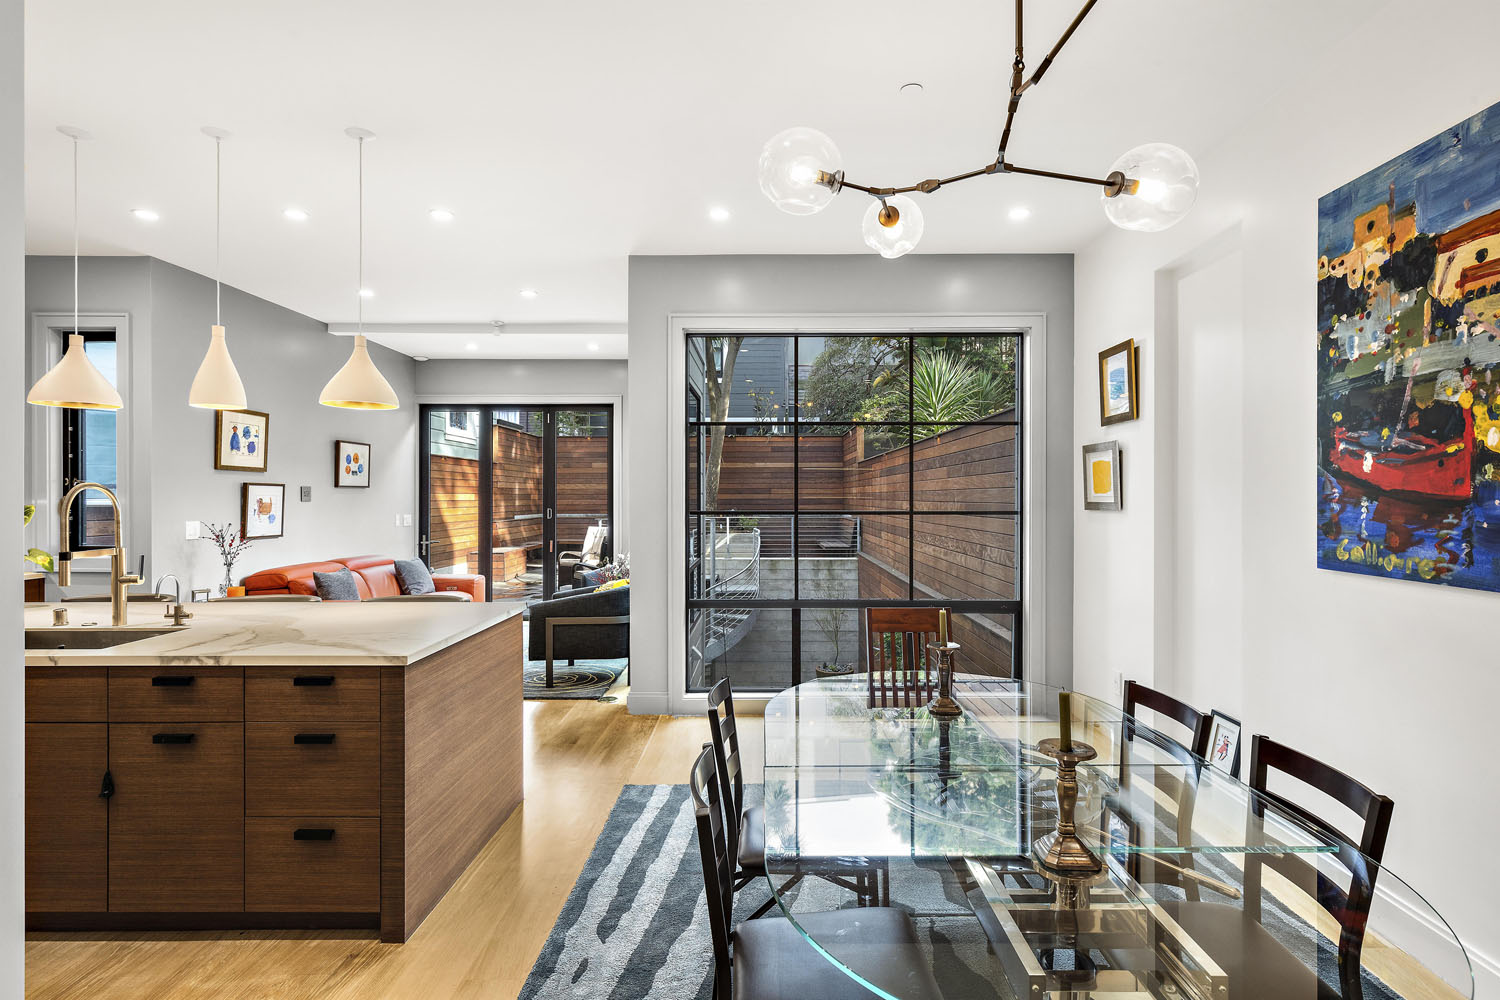 Kitchen and dining area at 858 Ashbury, showing a large open-floor-plan room with floor to ceiling windows